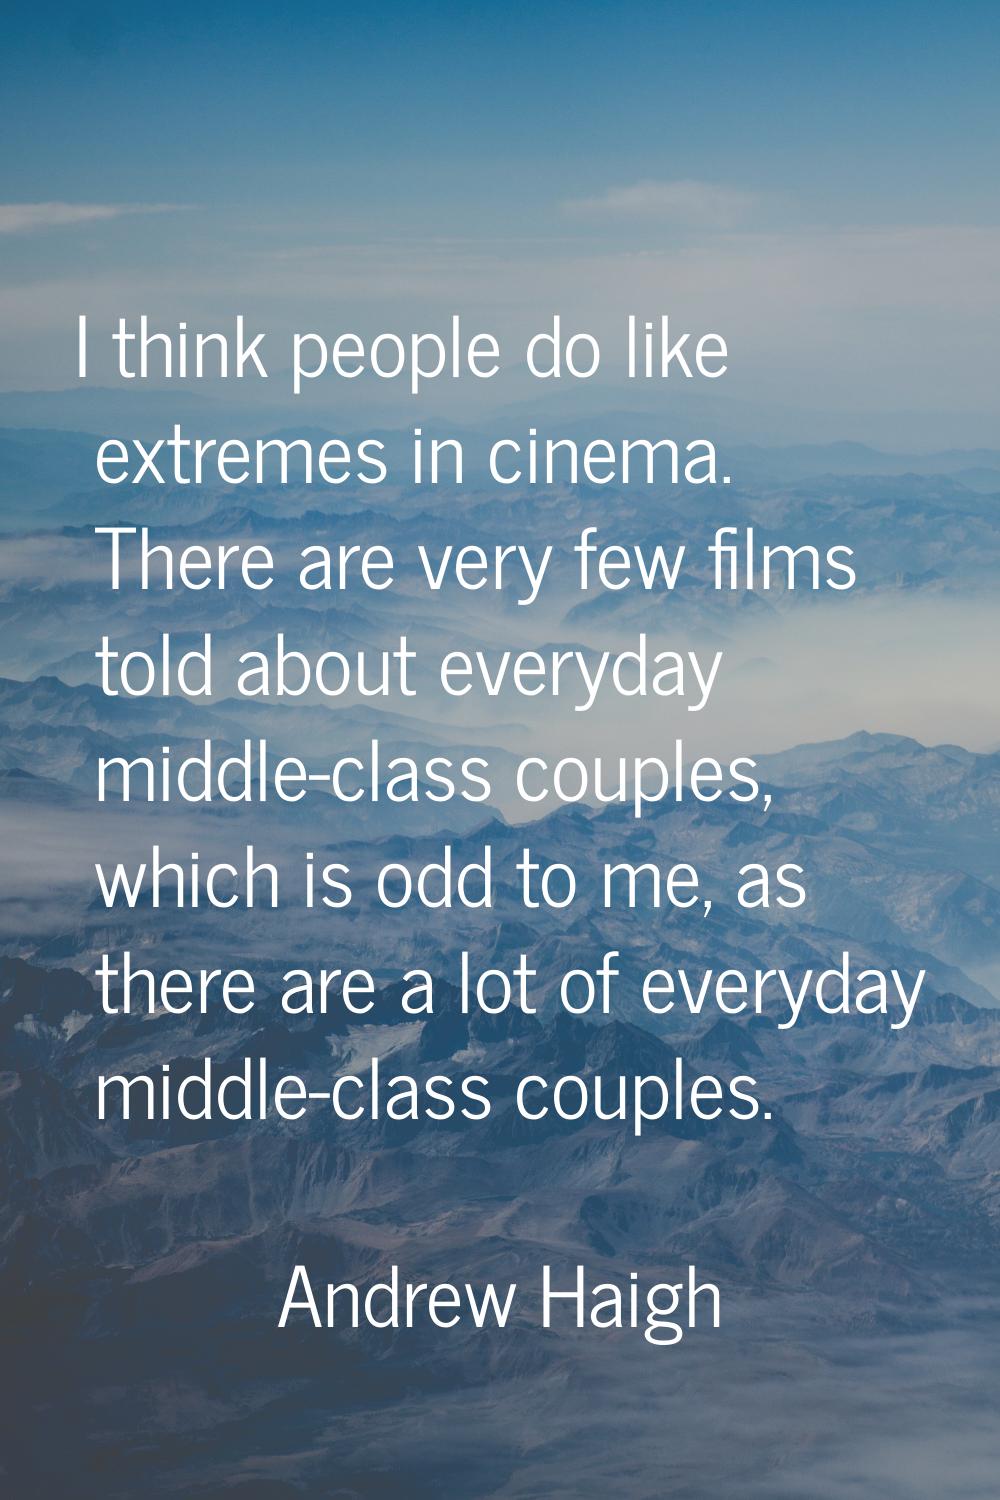 I think people do like extremes in cinema. There are very few films told about everyday middle-clas